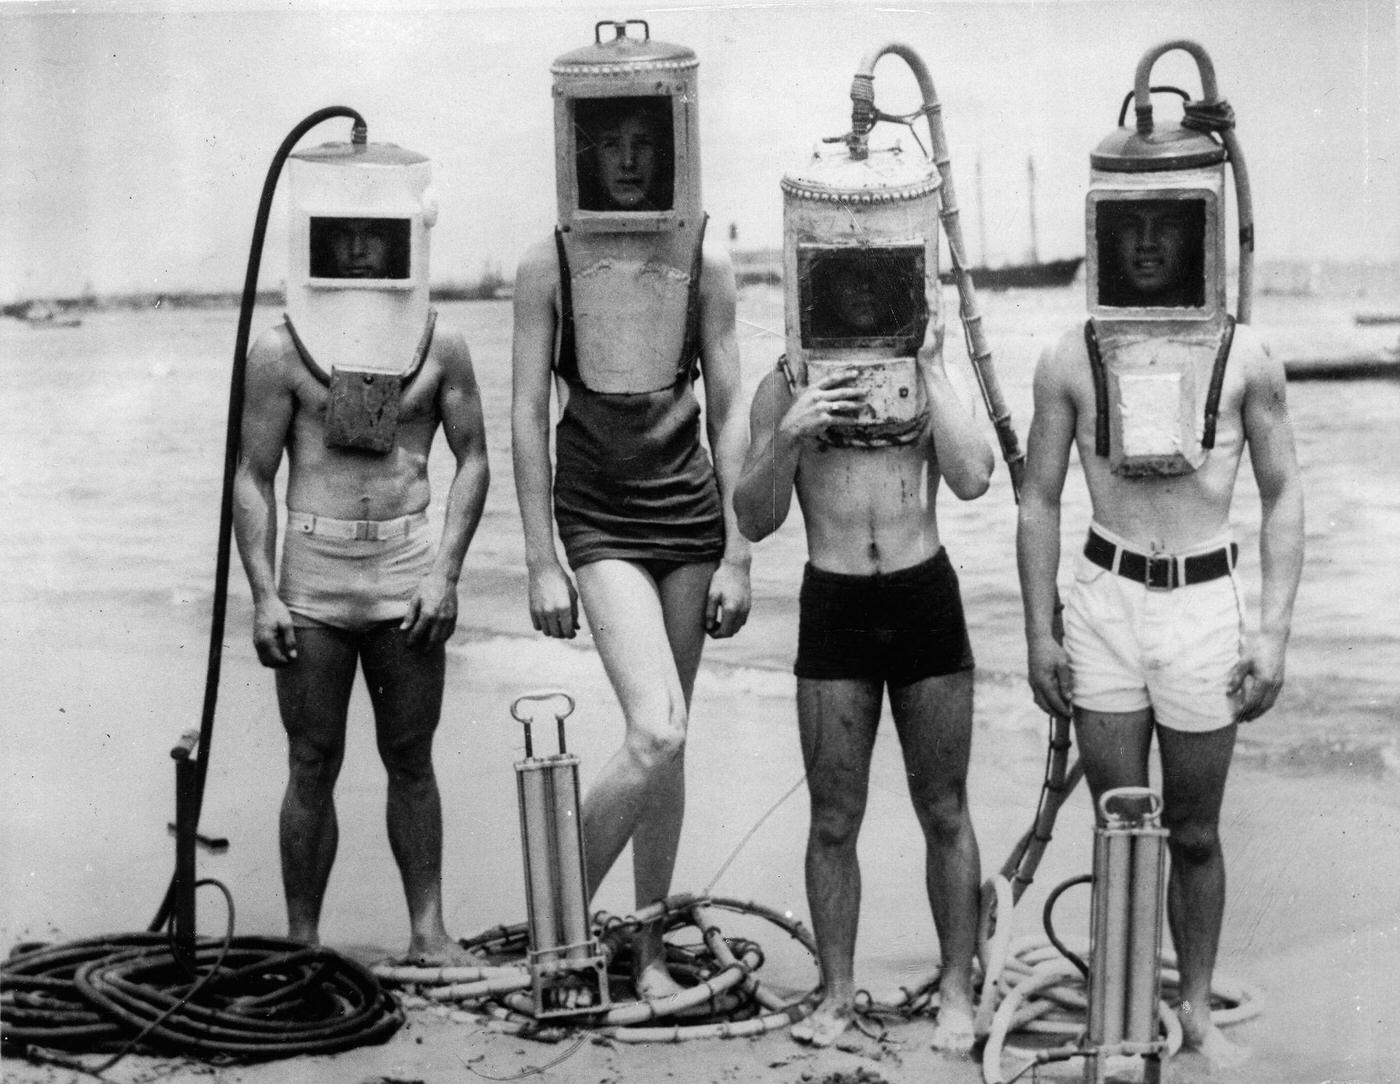 A group of boys made diving helmets from sections of hot water heaters, boilers and other easily secured "junk". Los Angeles. USA - June 23, 1933.